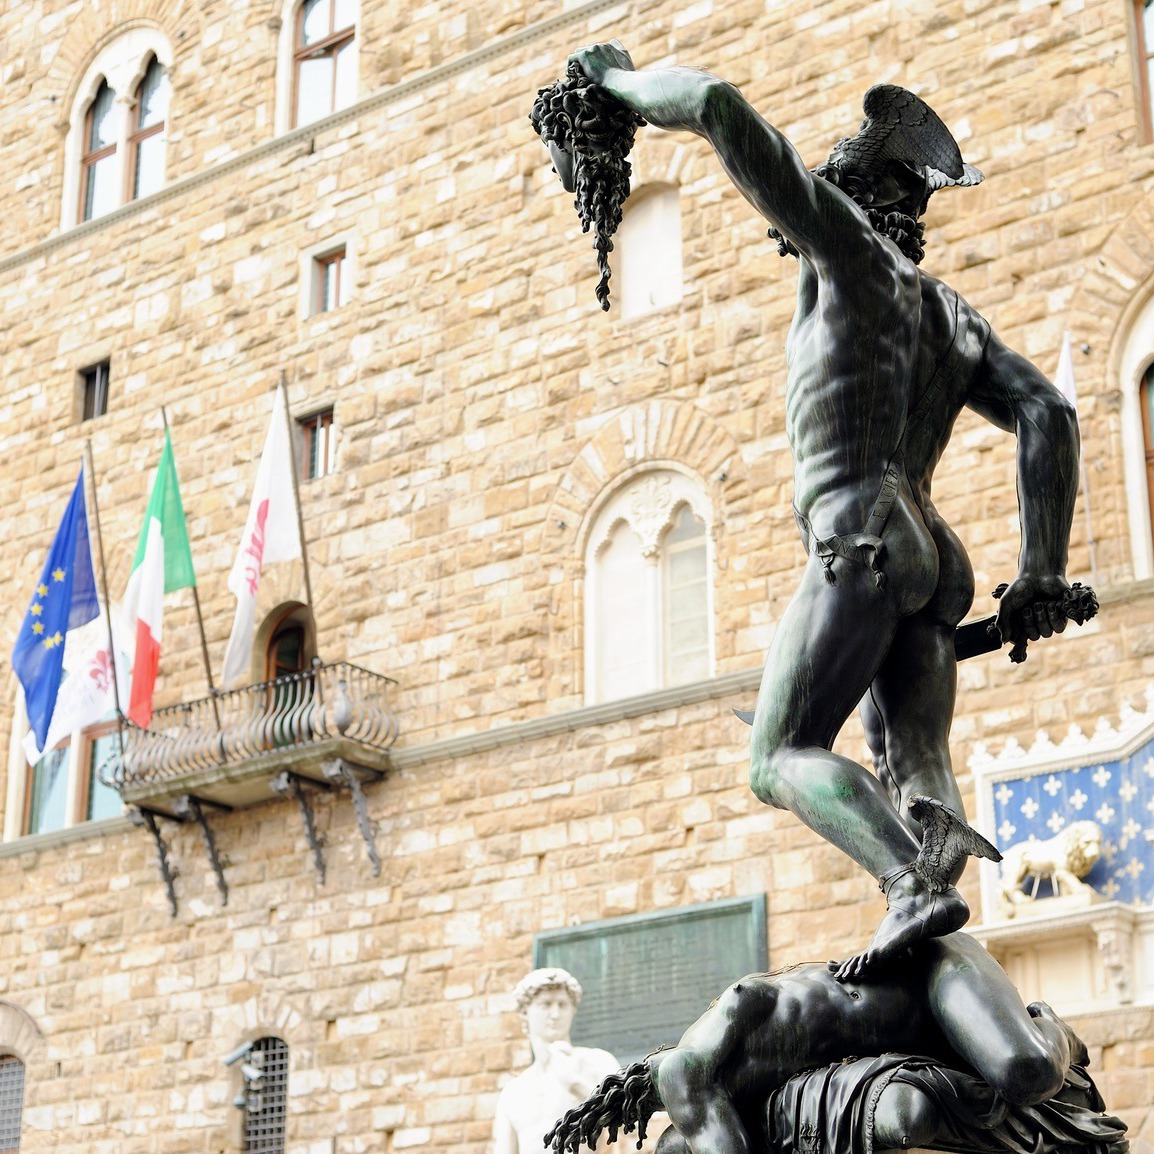 Florence guided City Tours by bus